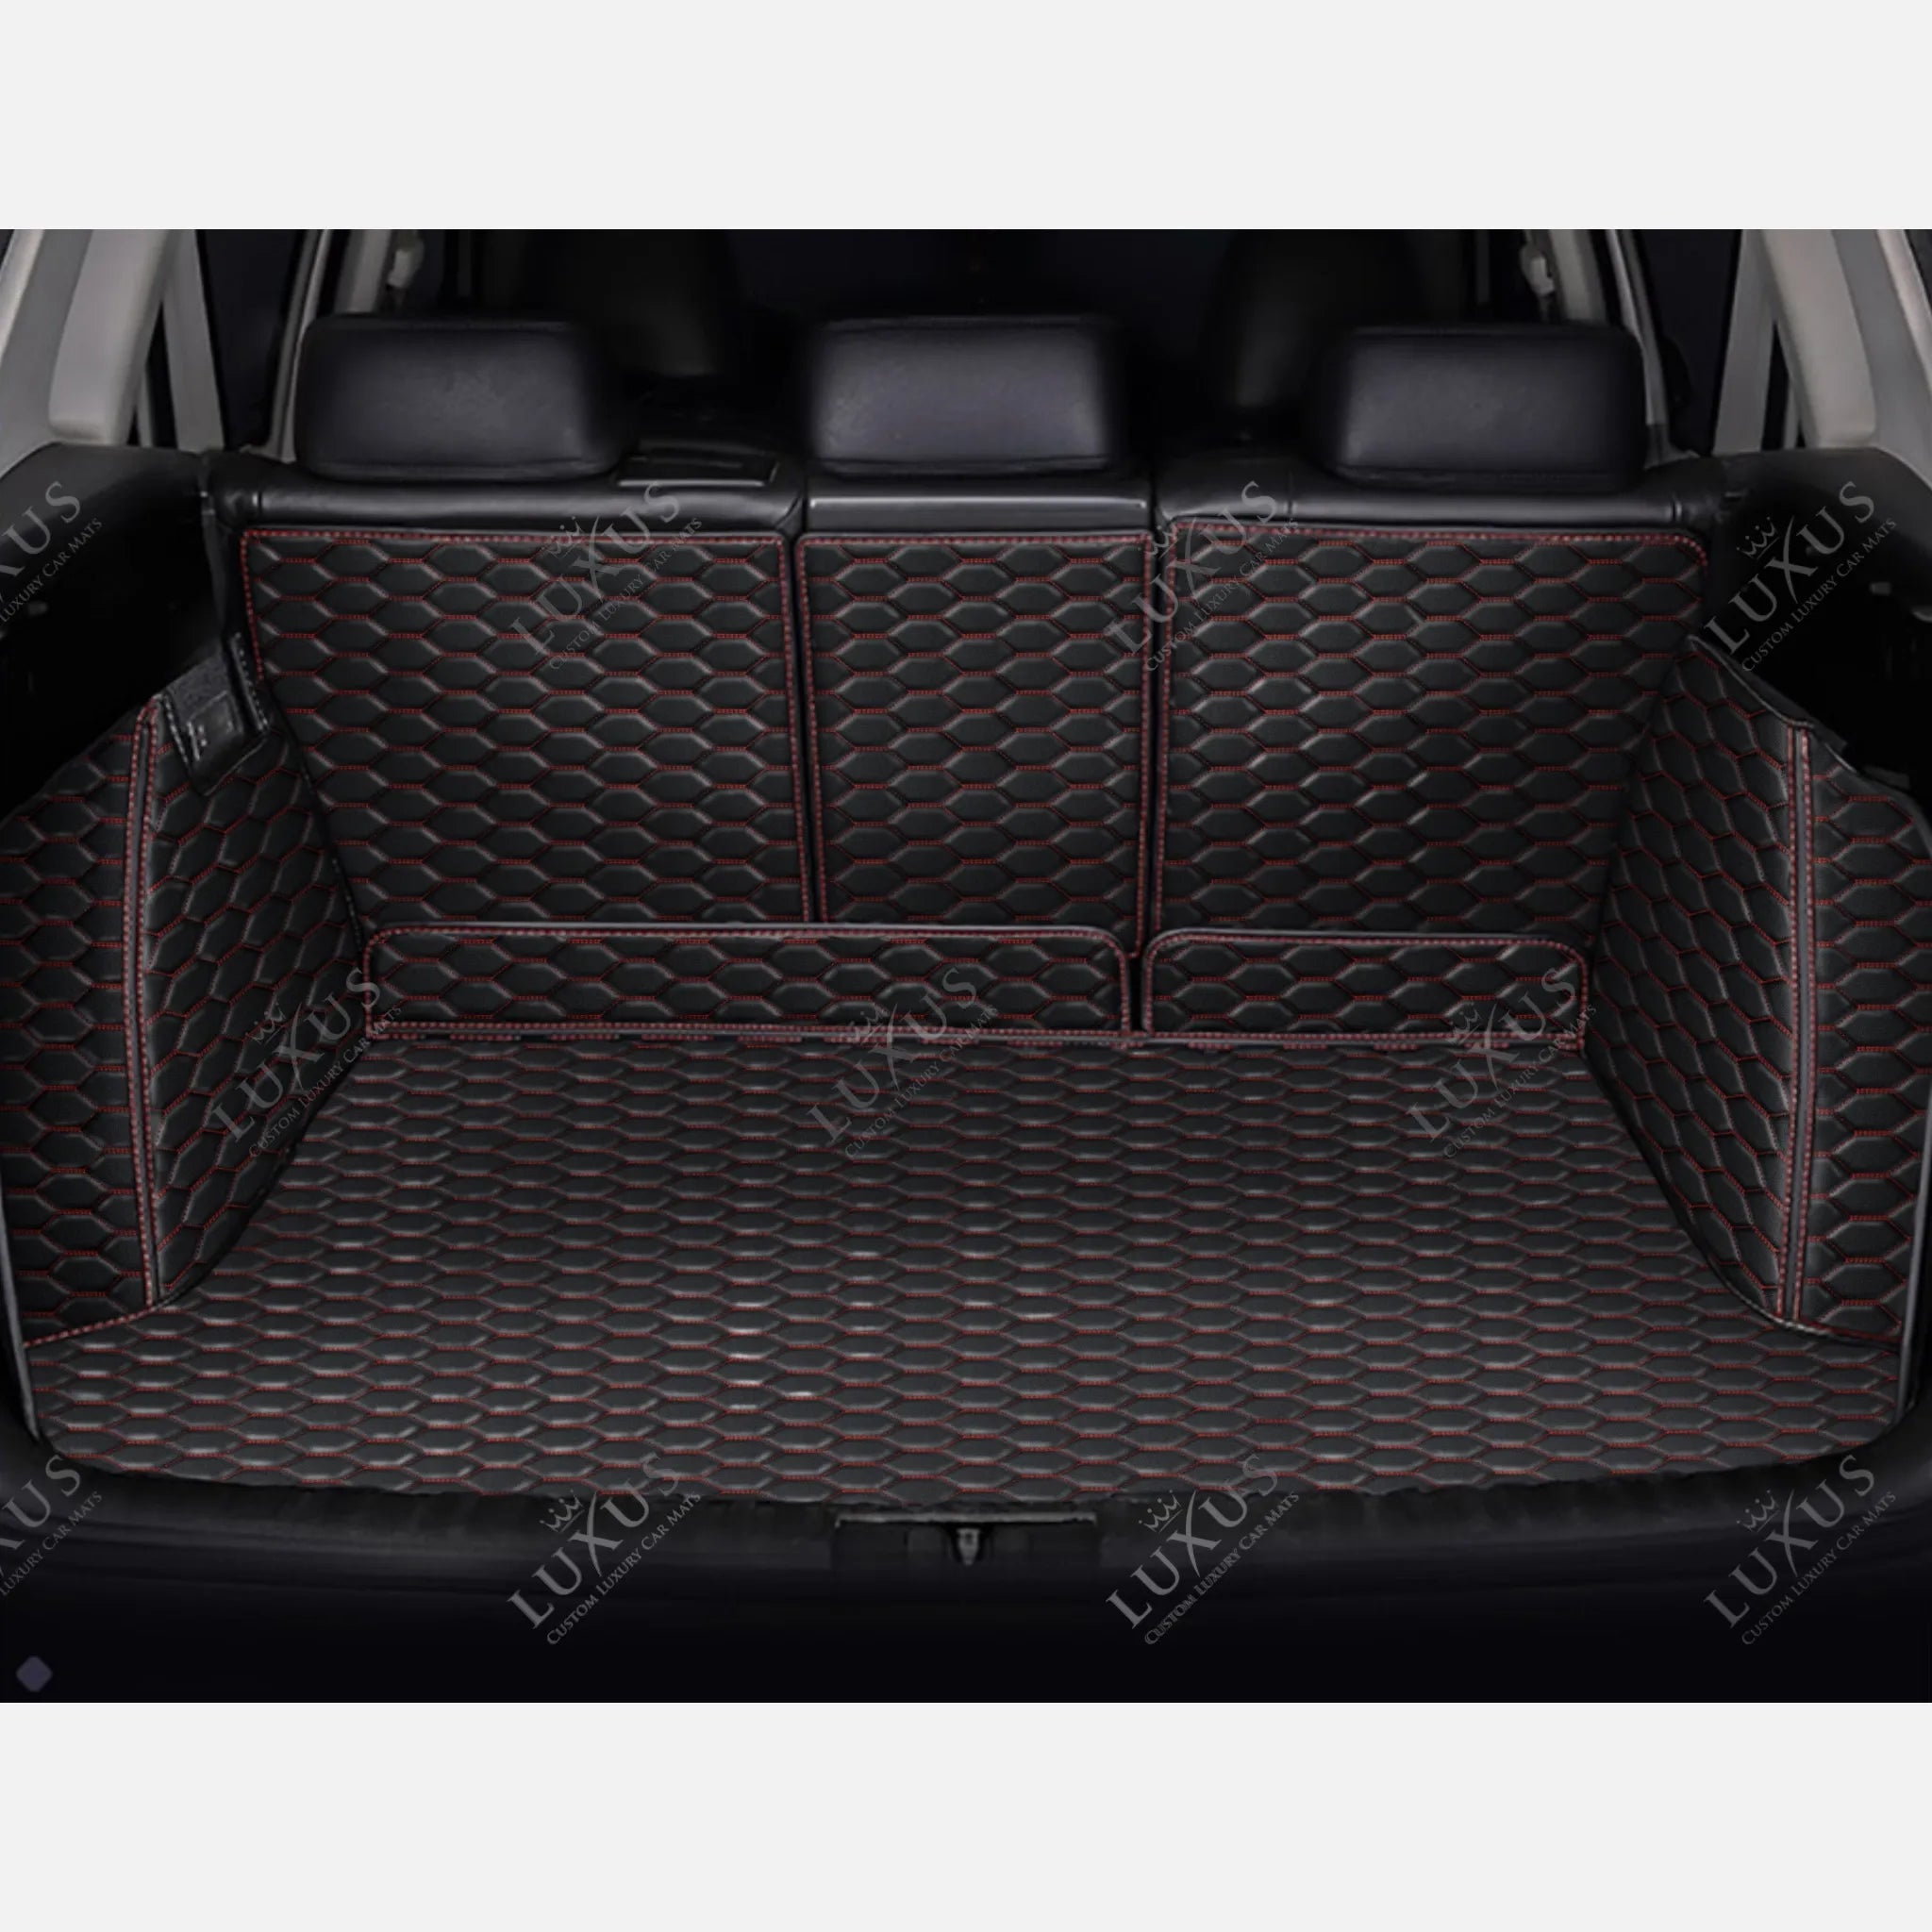 NEW Black & Red Stitching 3D Honeycomb Luxury Boot/Trunk Mat